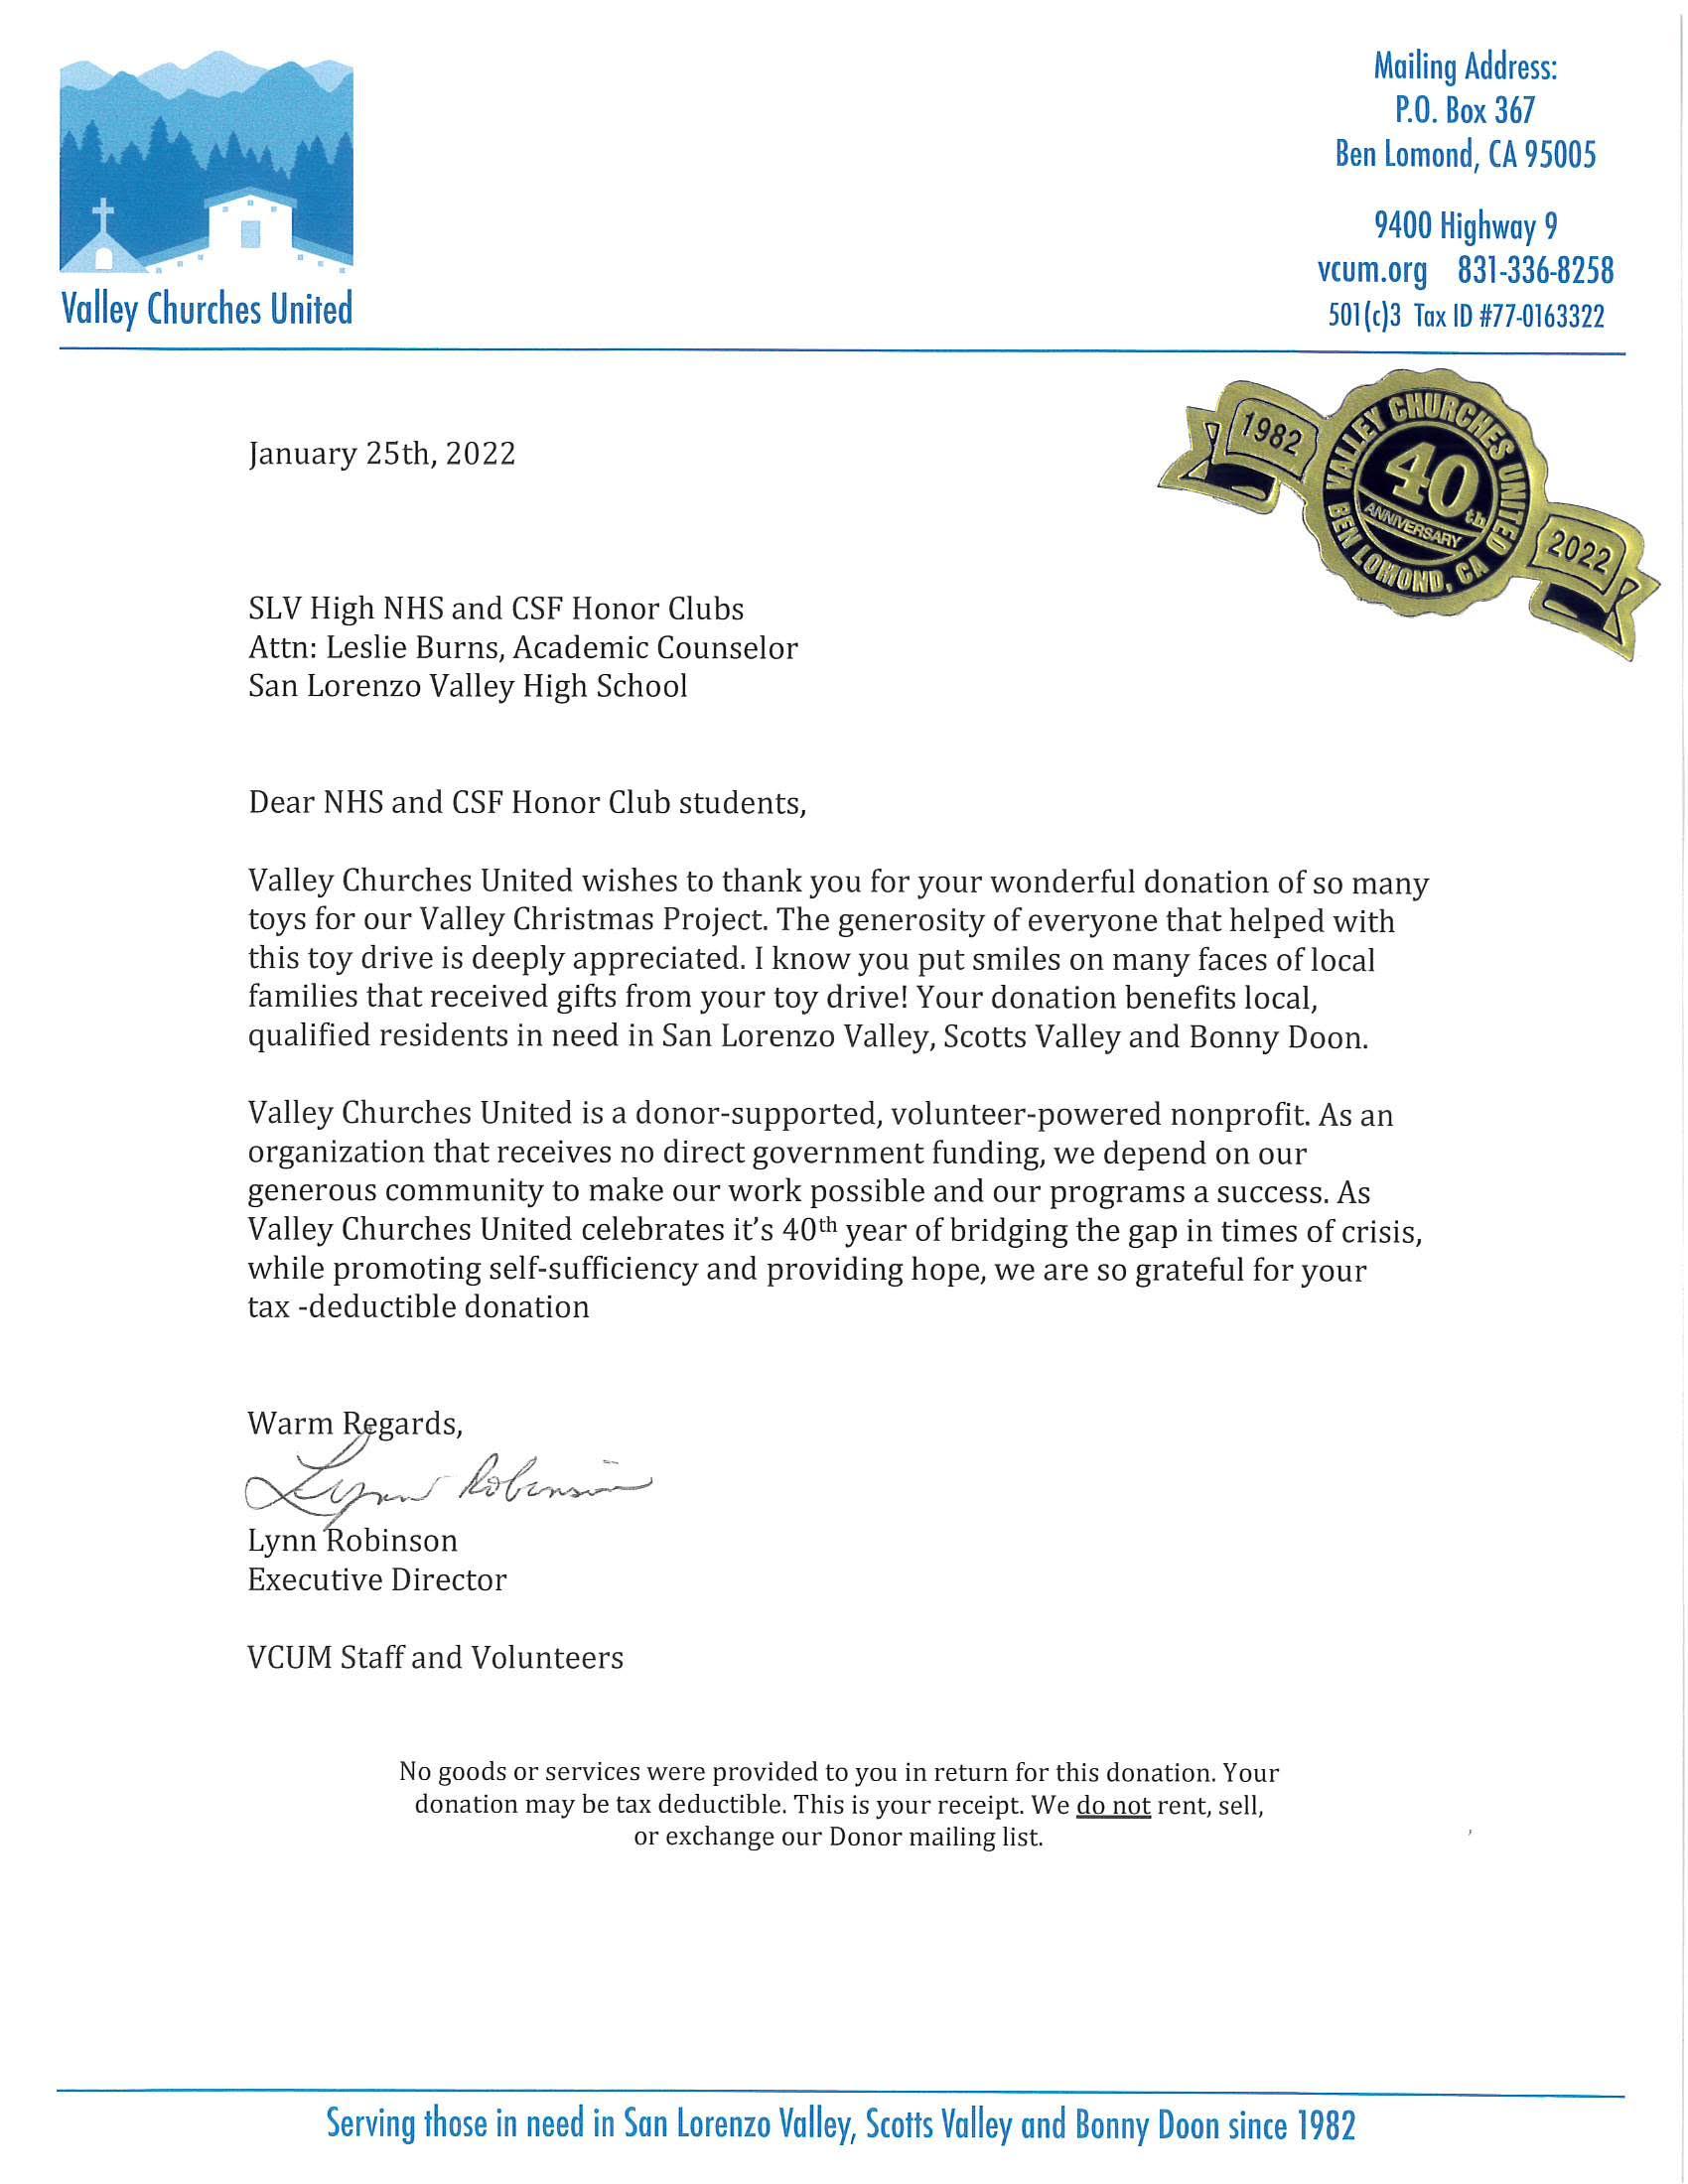 SLV High toy drive letter